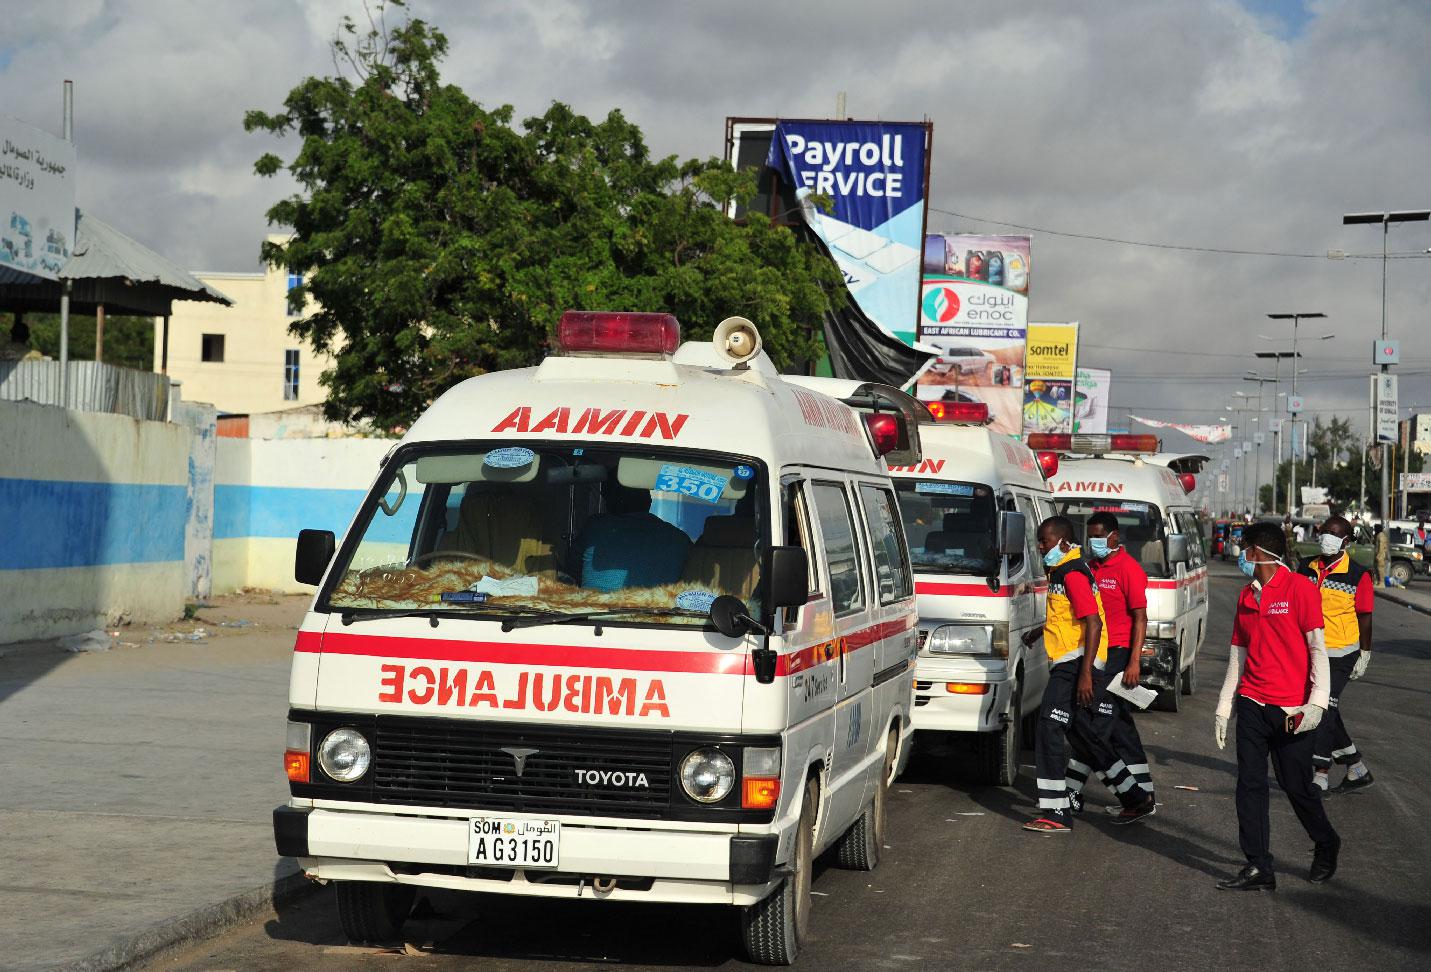 Somali ambulances carrying severely injured patients after an explosion in Mogadishu wait to access the airport where the wounded will be evacuated on Turkish military planes on October 16, 2017.